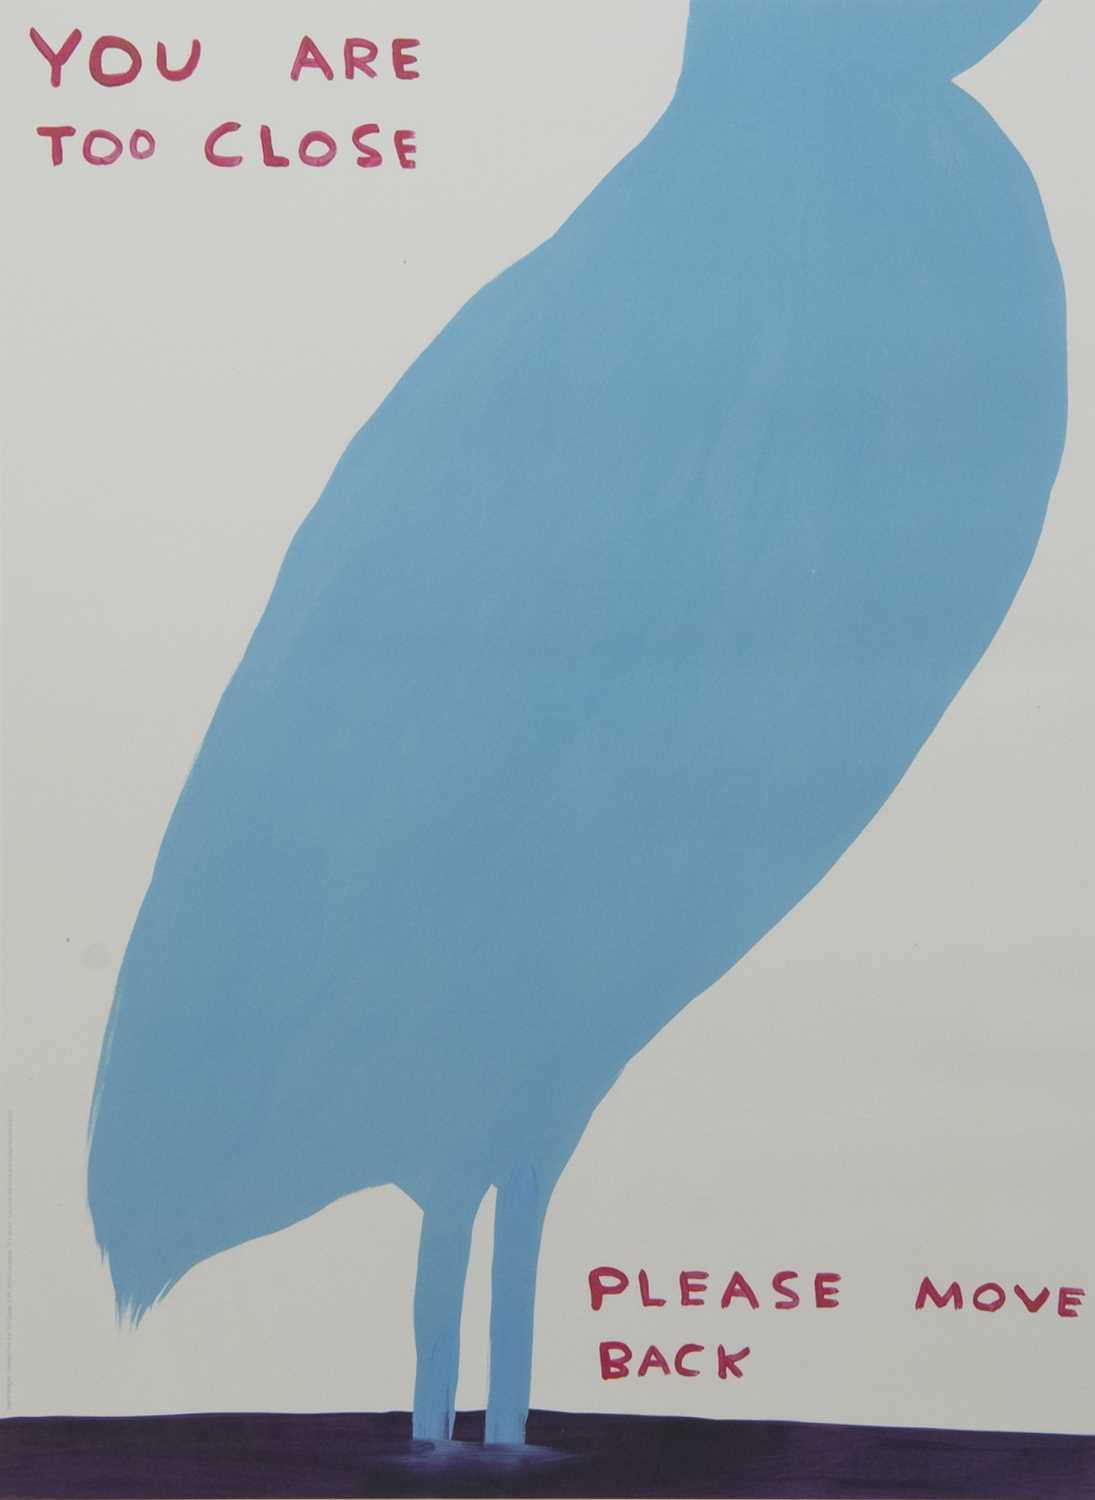 Lot 559 - YOU ARE TOO CLOSE, A LITHOGRAPH BY DAVID SHRIGLEY